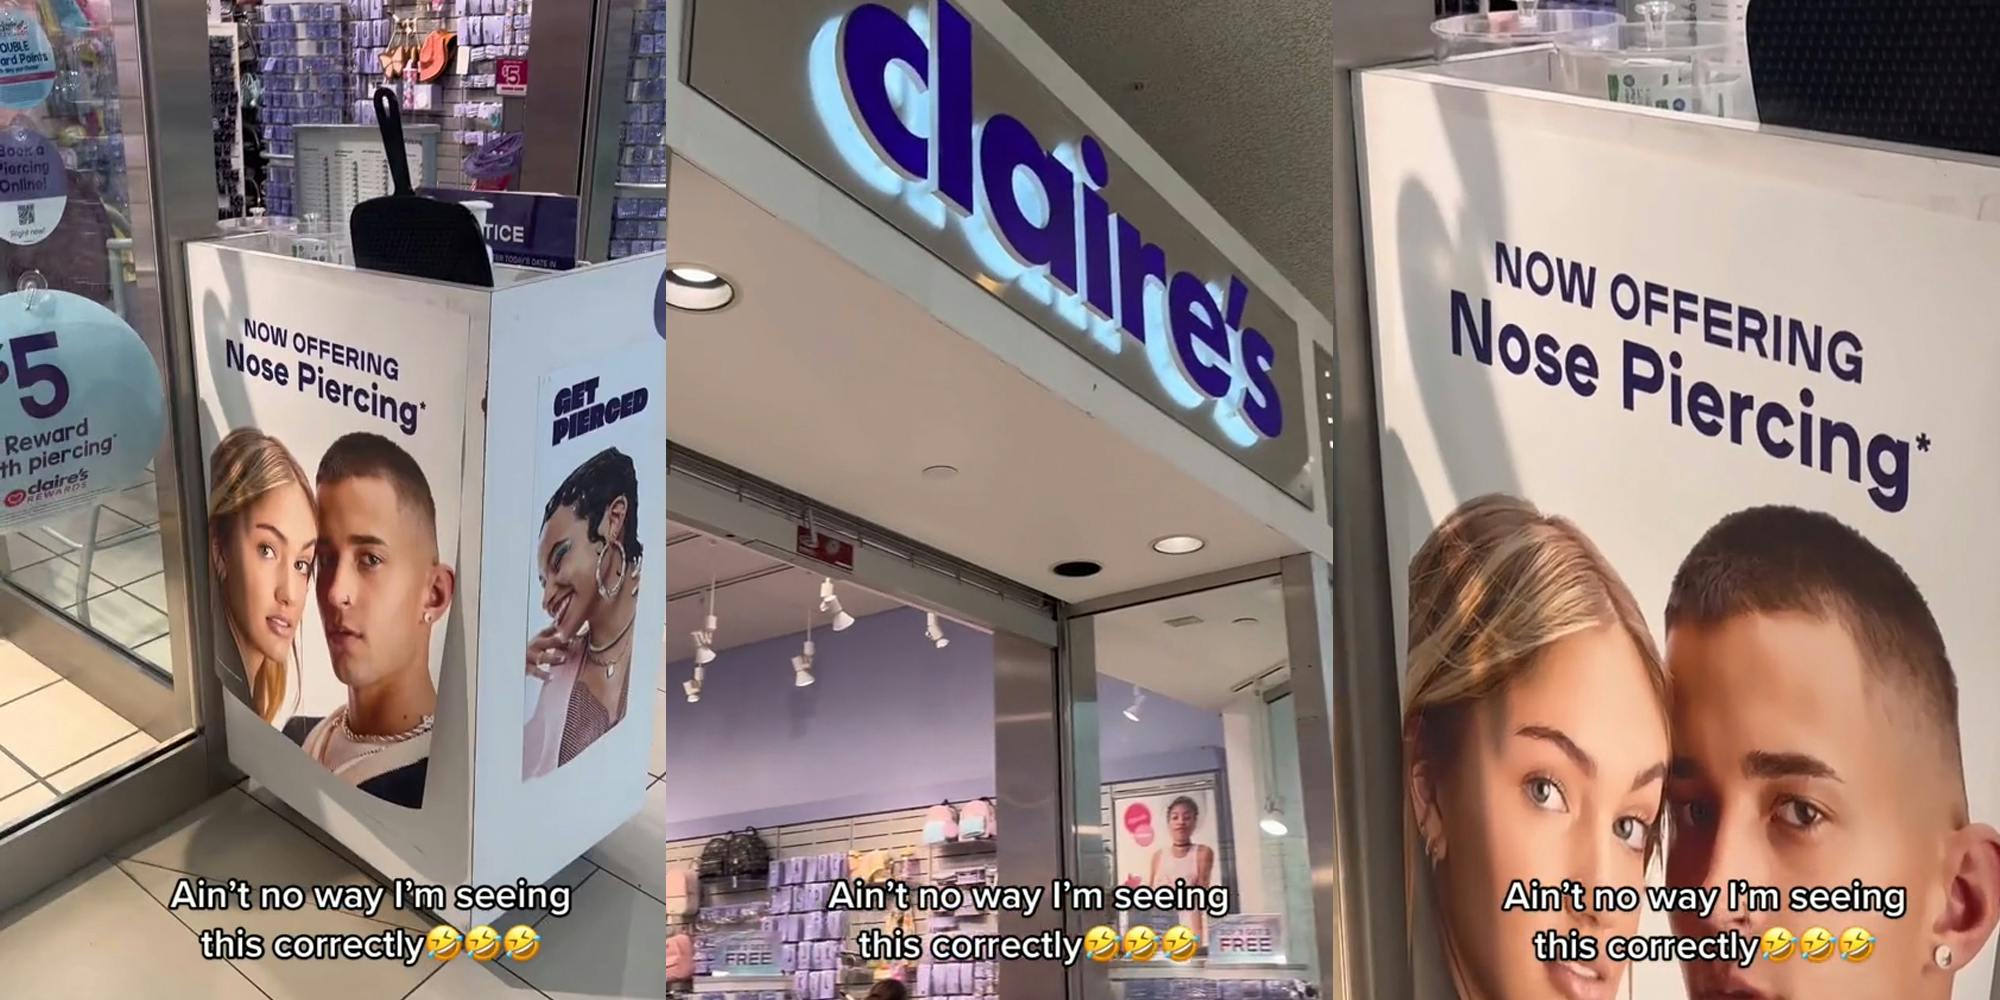 Clair's nose piercing stand with caption "Ain't no way I'm seeing this correctly" (l) Clair's sign above store with caption "Ain't no way I'm seeing this correctly" (c) Clair's nose piercing stand with caption "Ain't no way I'm seeing this correctly" (r)